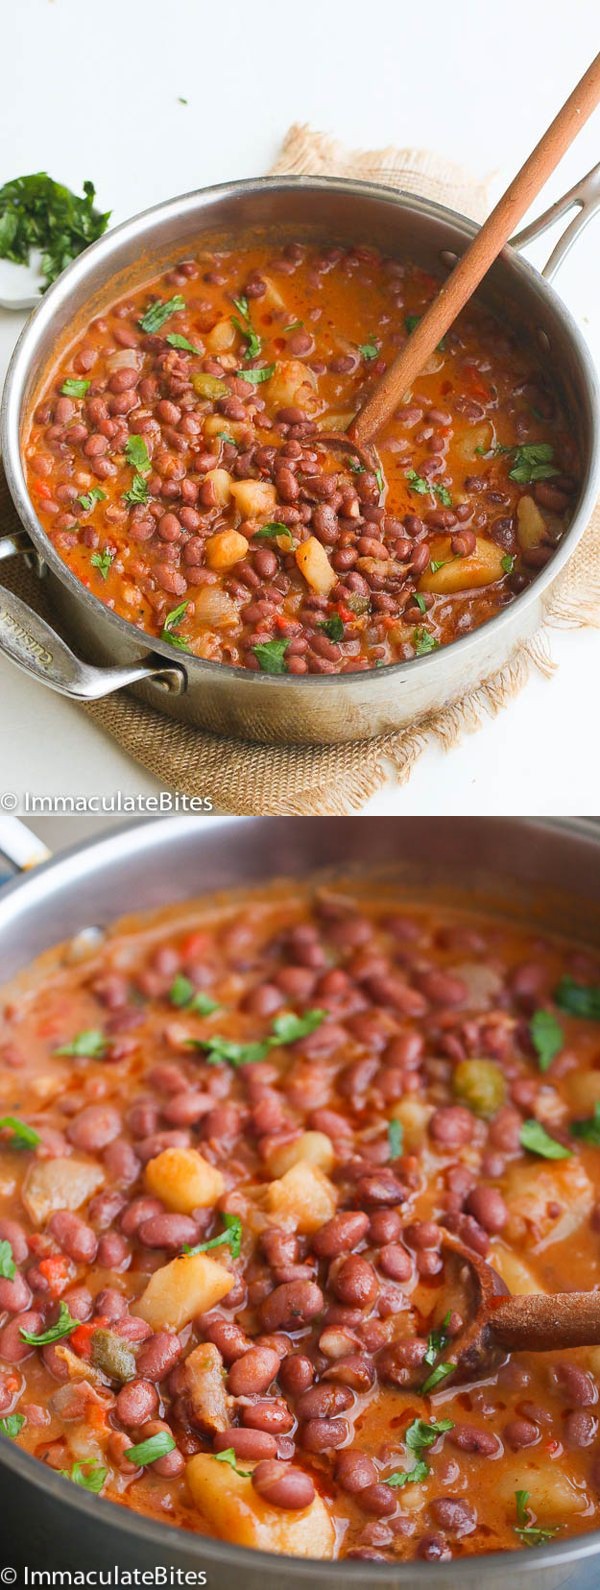 Puerto Rican Style beans